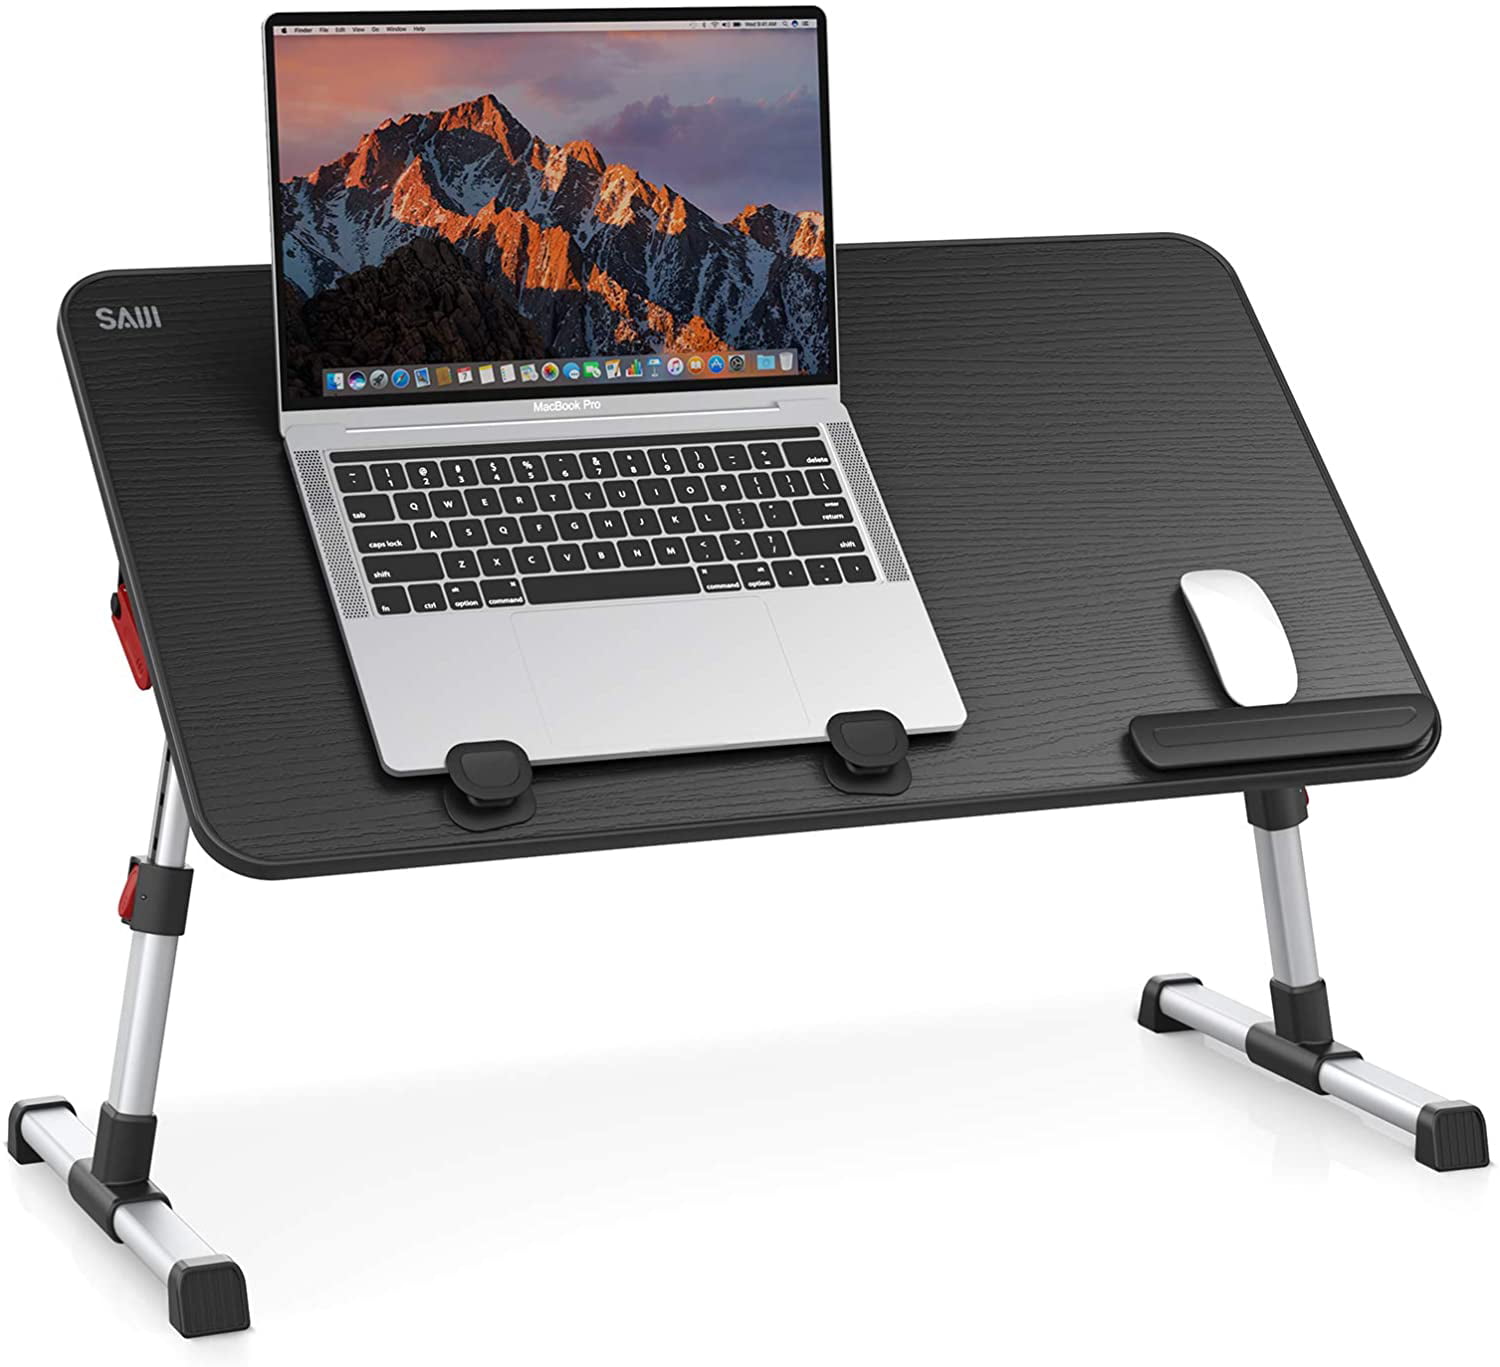 Folding Lazy Laptop Computer Table Portable Lap Desk Bedside Tray Stand Home US 